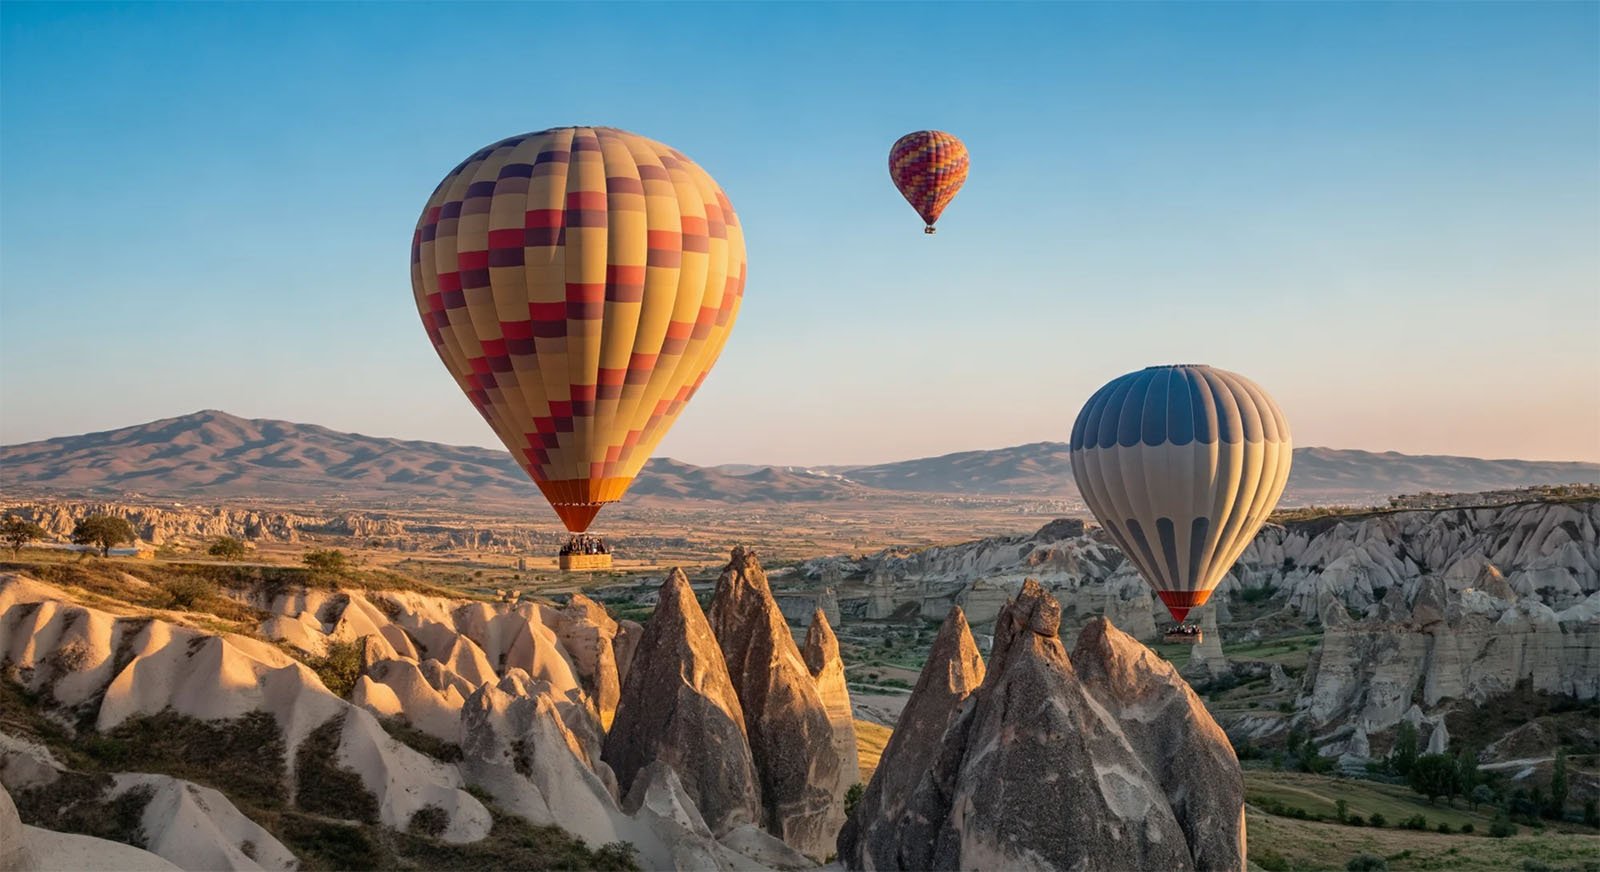 A picturesque landscape featuring three colorful hot air balloons floating over unique, rocky formations during sunrise or sunset. The sky is clear, and the distant mountains frame the scene, adding to the serene and captivating view.